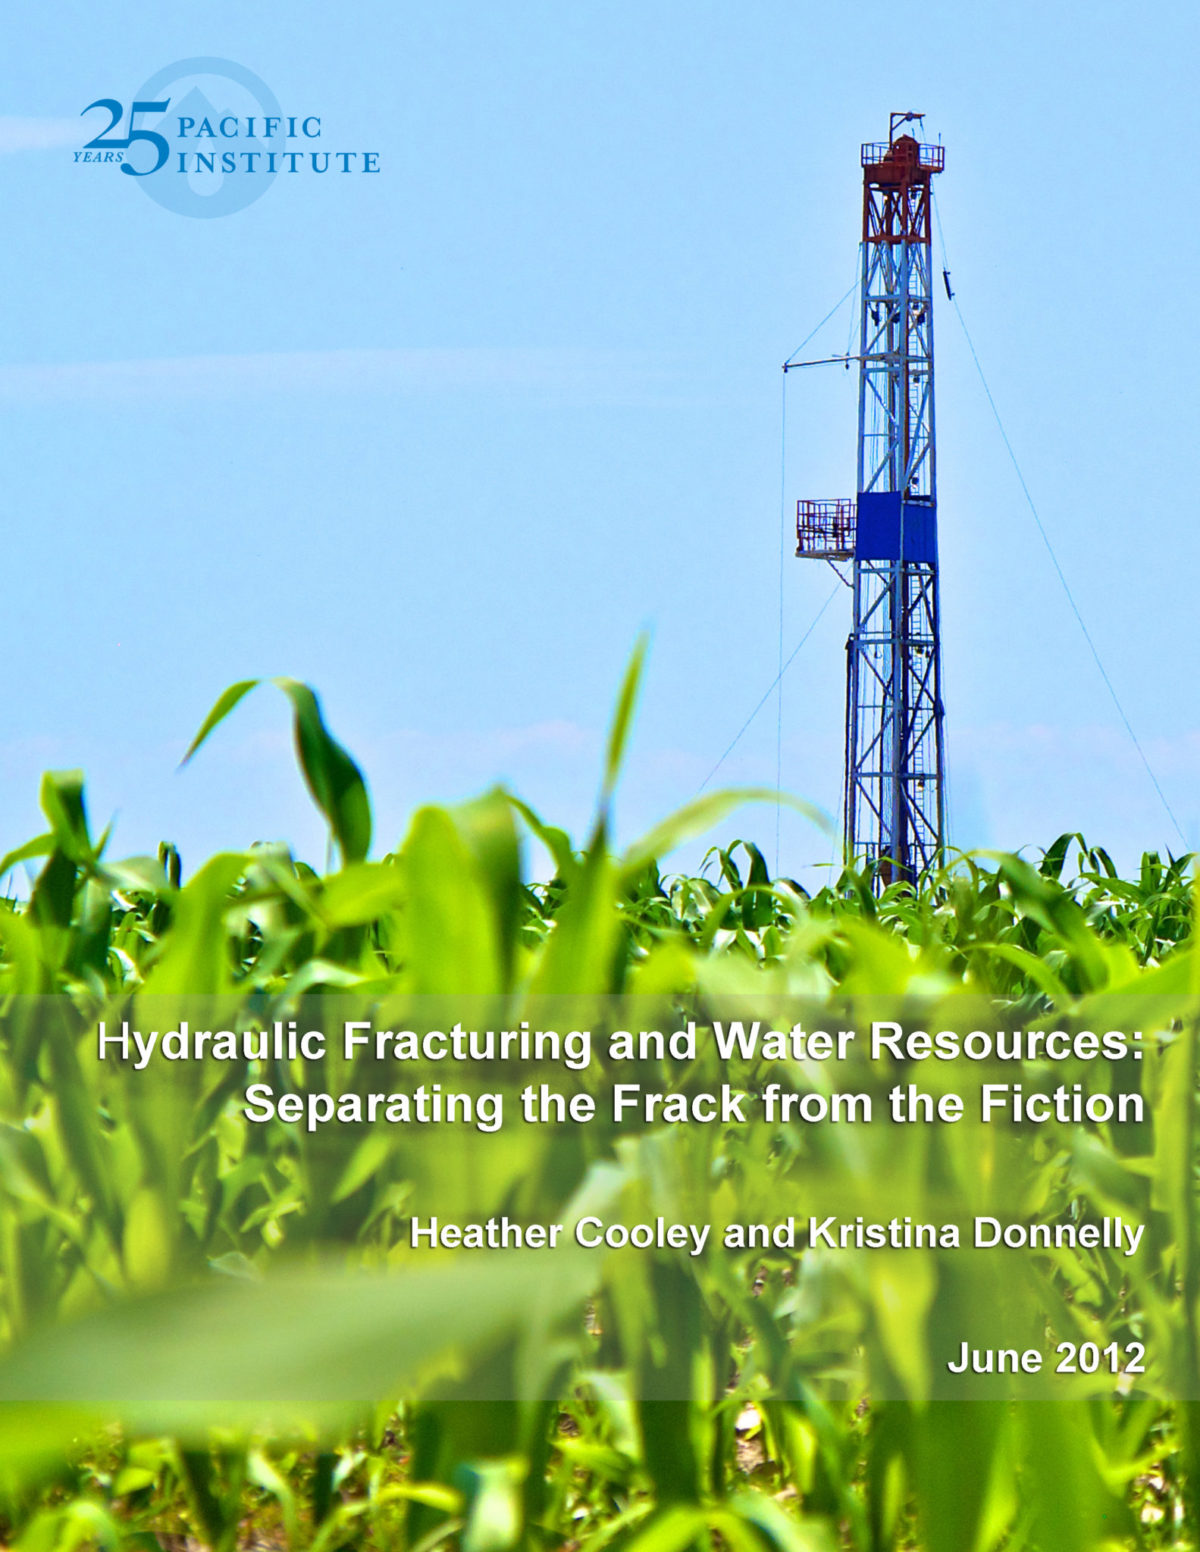 Hydraulic Fracturing and Water Resources: Separating the Frack from the Fiction